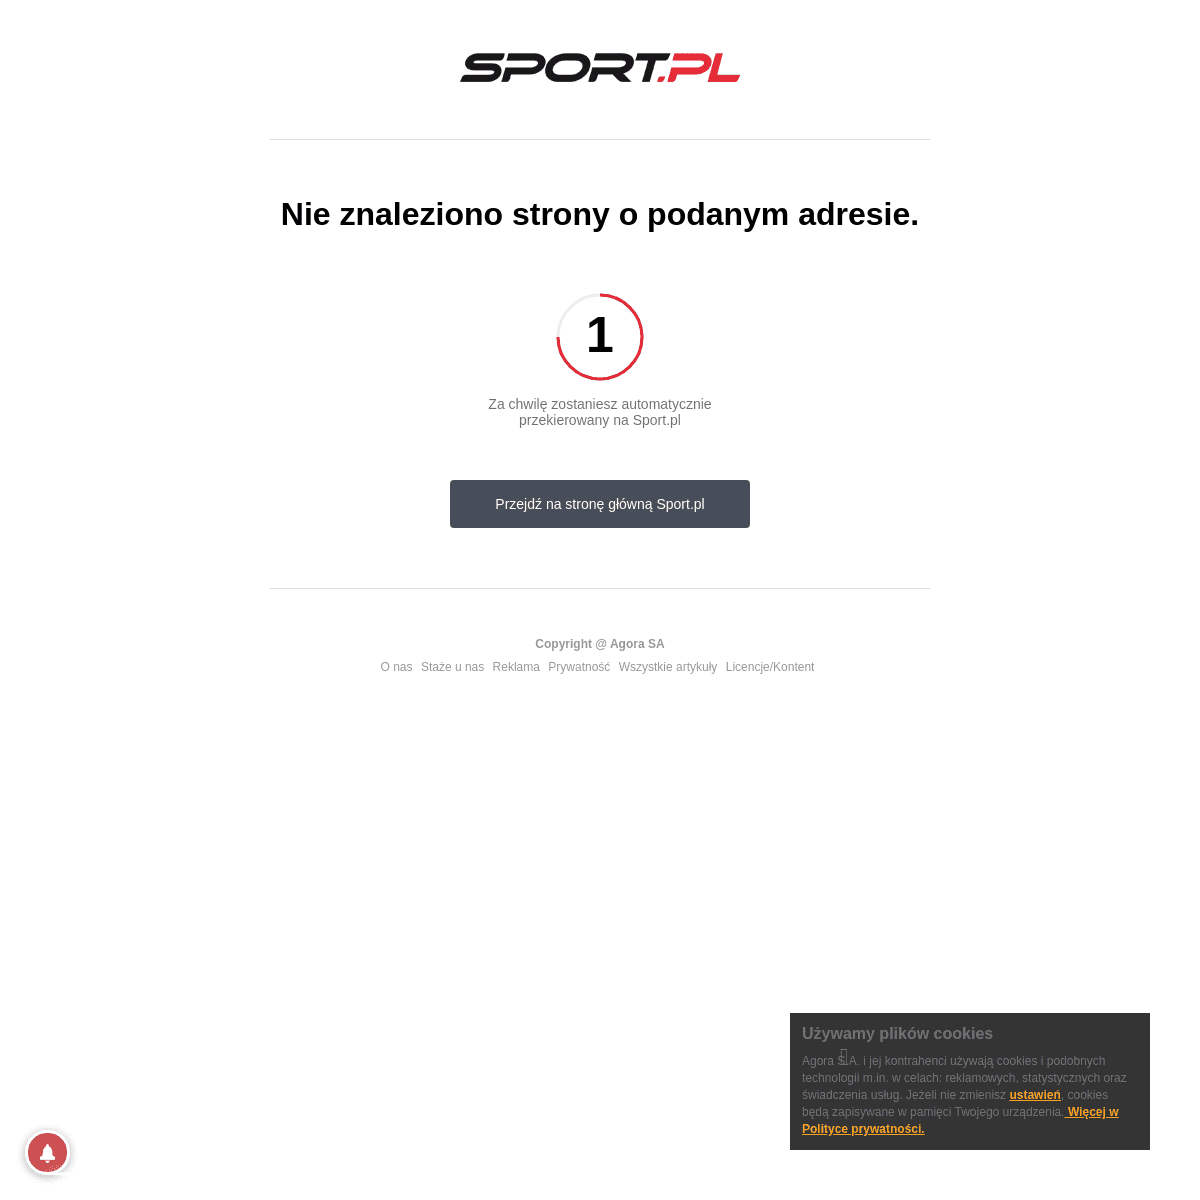 A complete backup of www.sport.pl/F1/7